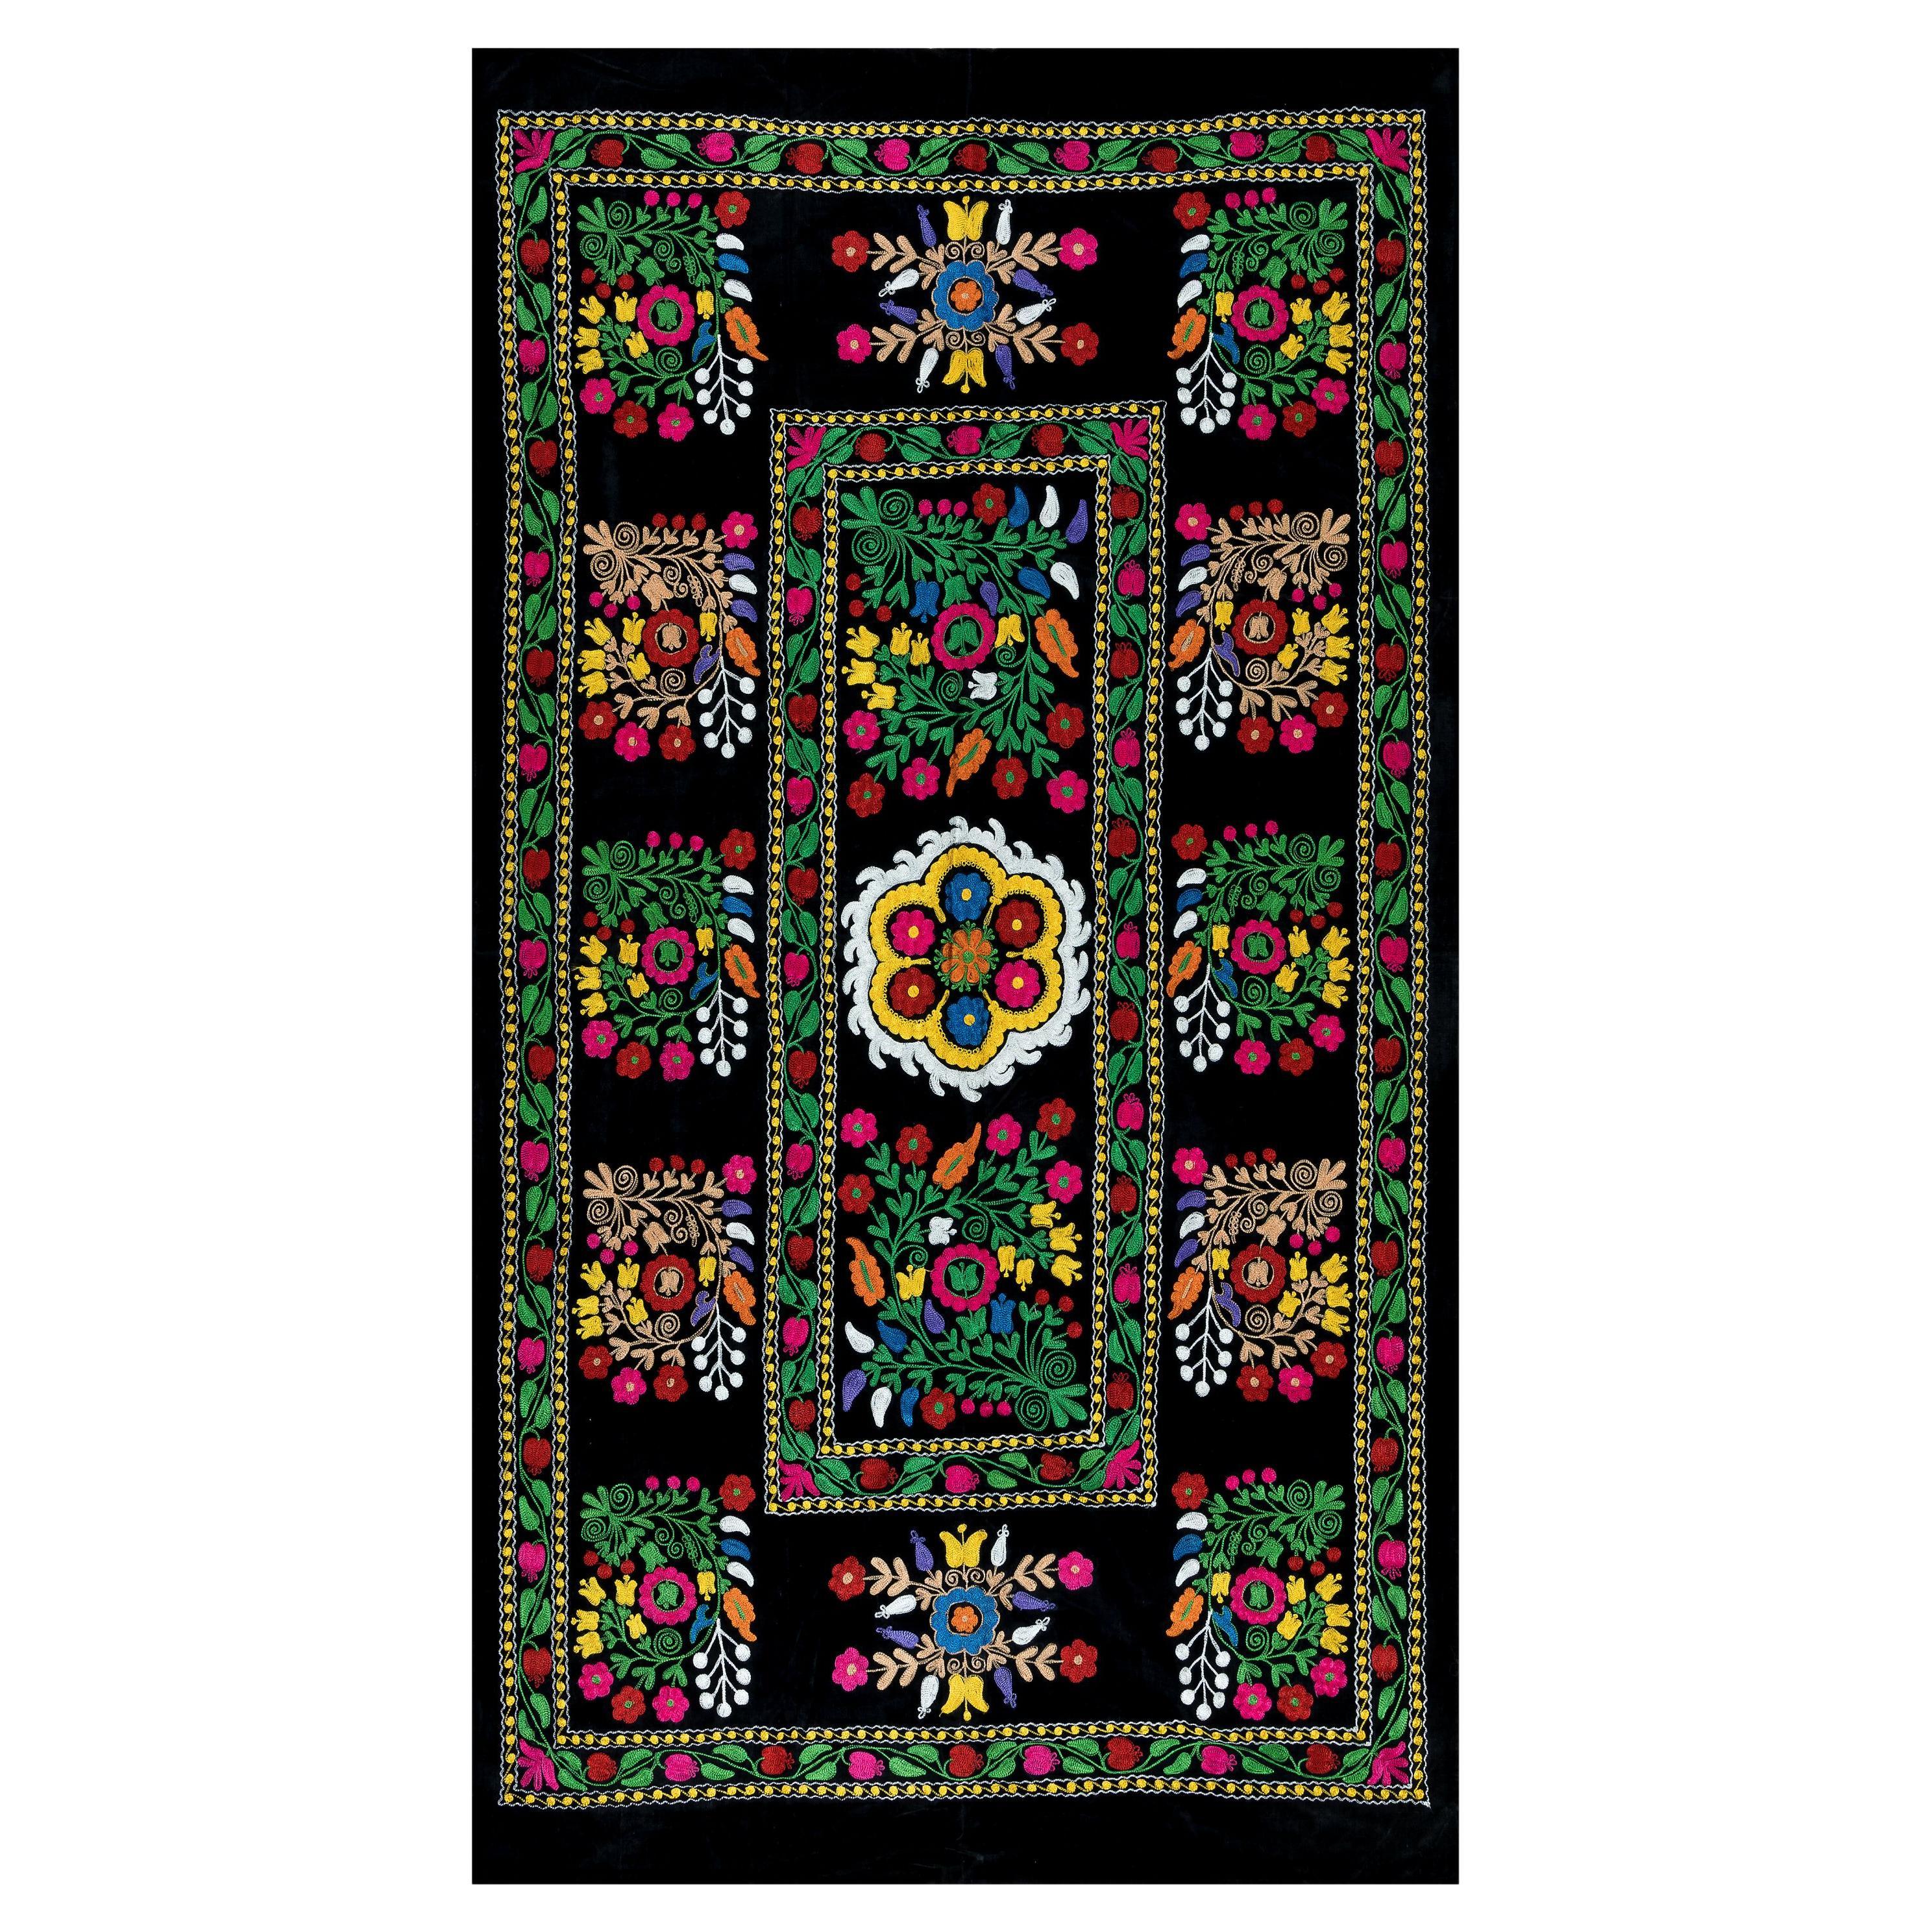 4.2x7.4 Ft Vintage Silk Embroidery Table Cover, Uzbek Colorful Wall Hanging